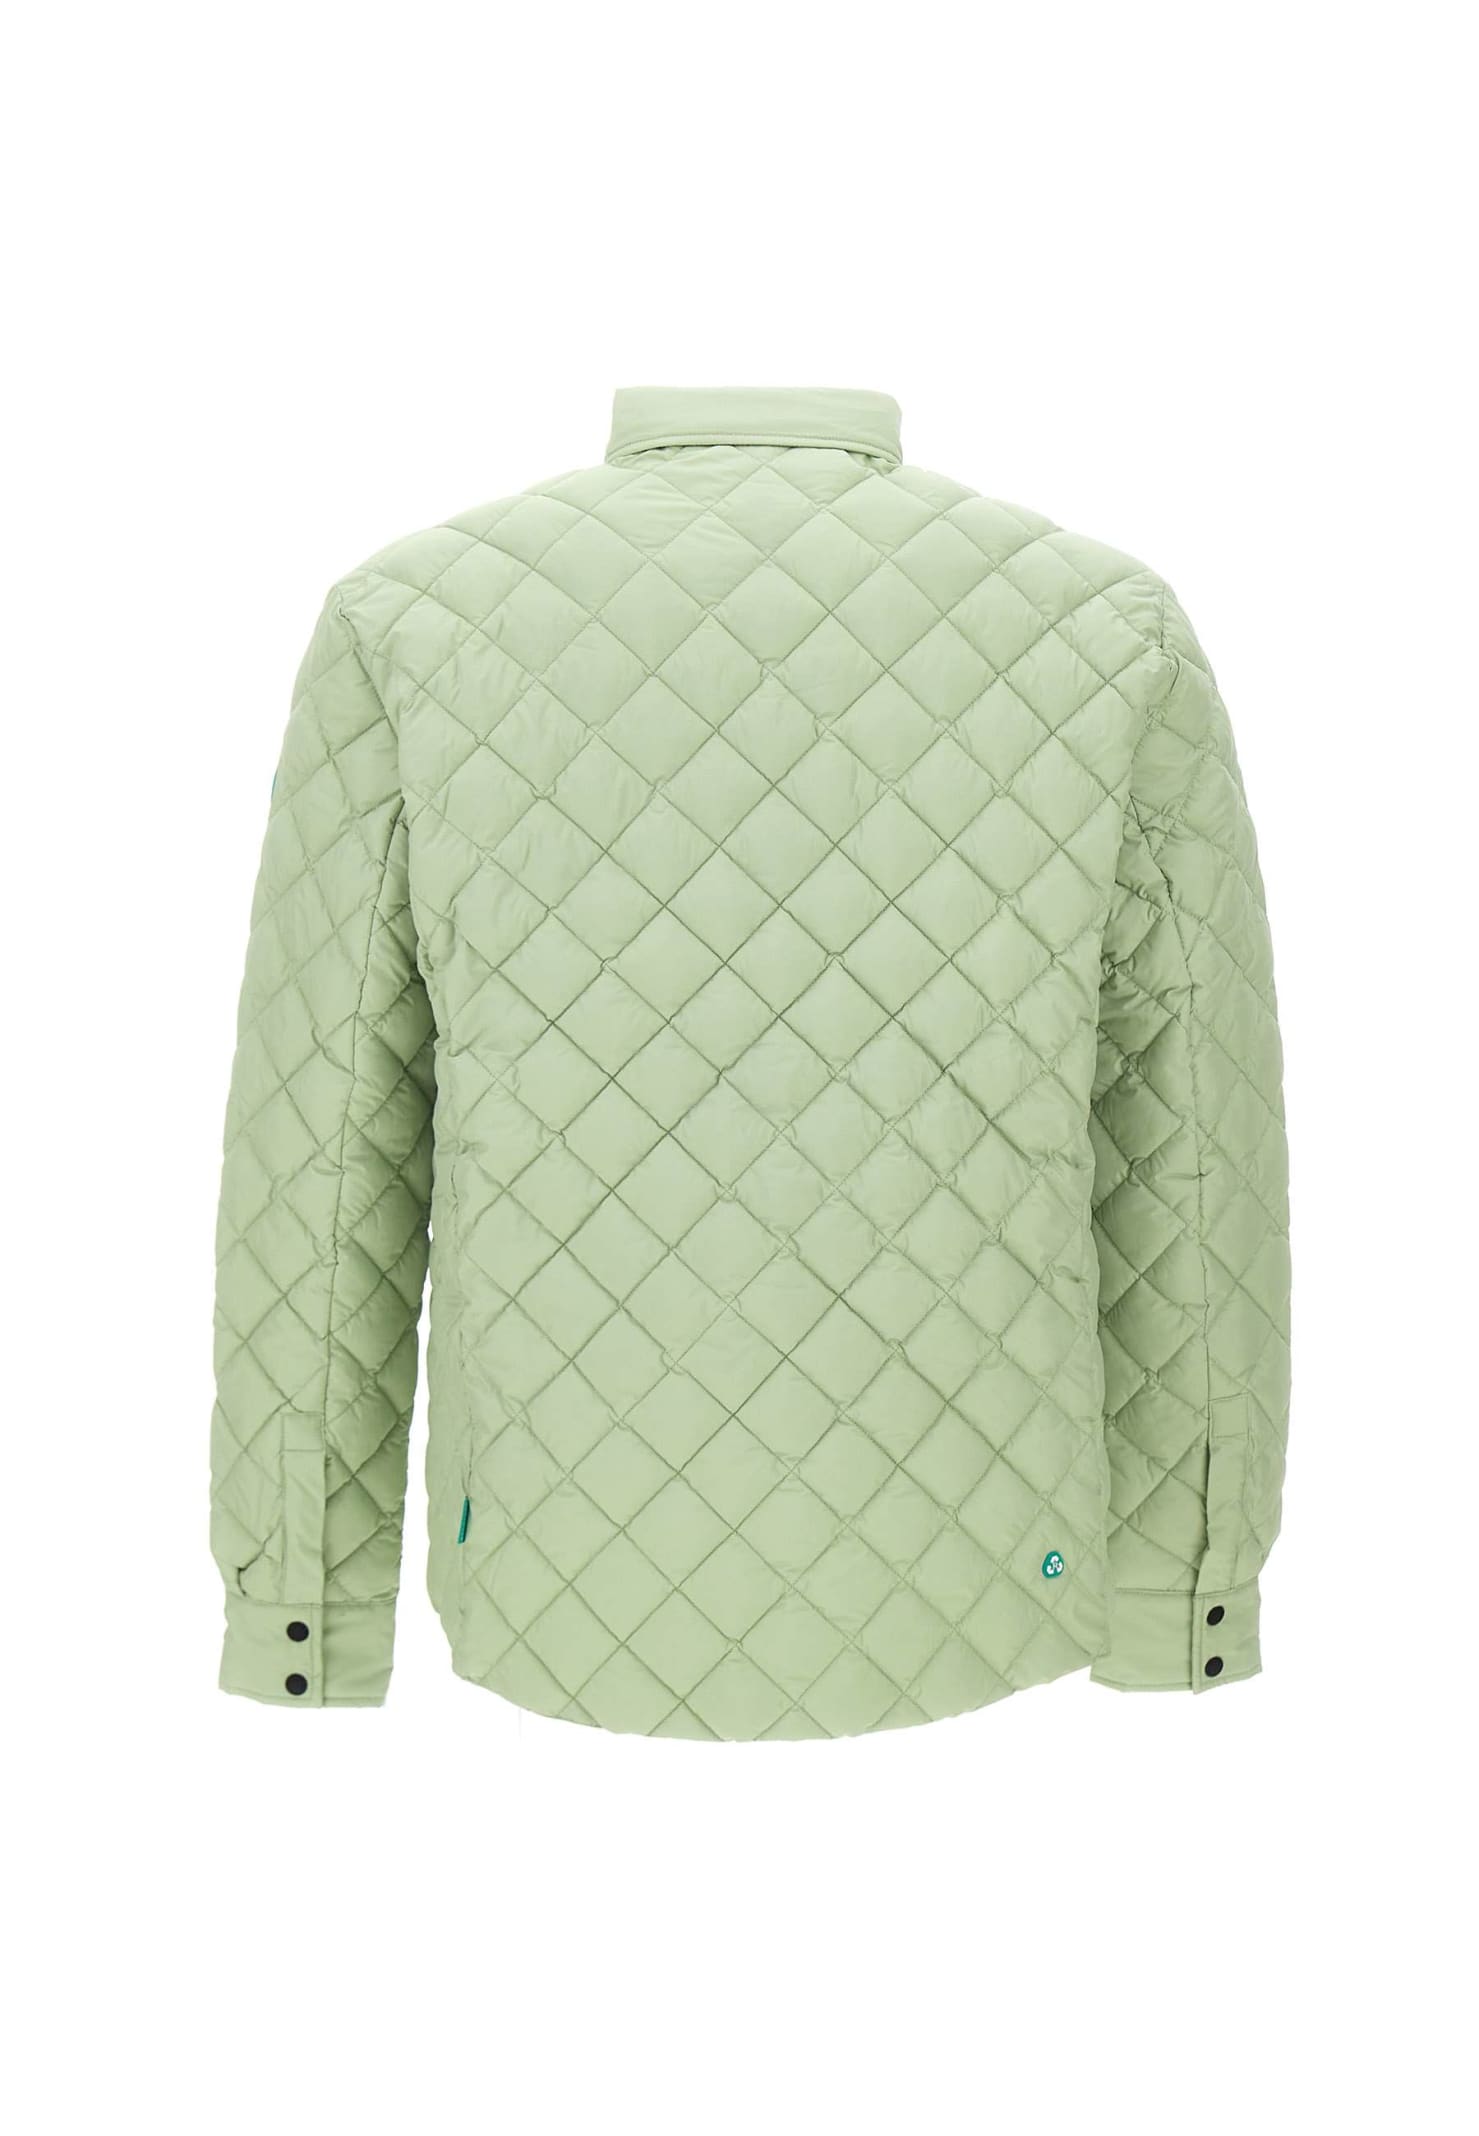 Shop Save The Duck Recy16ozzie Jacket